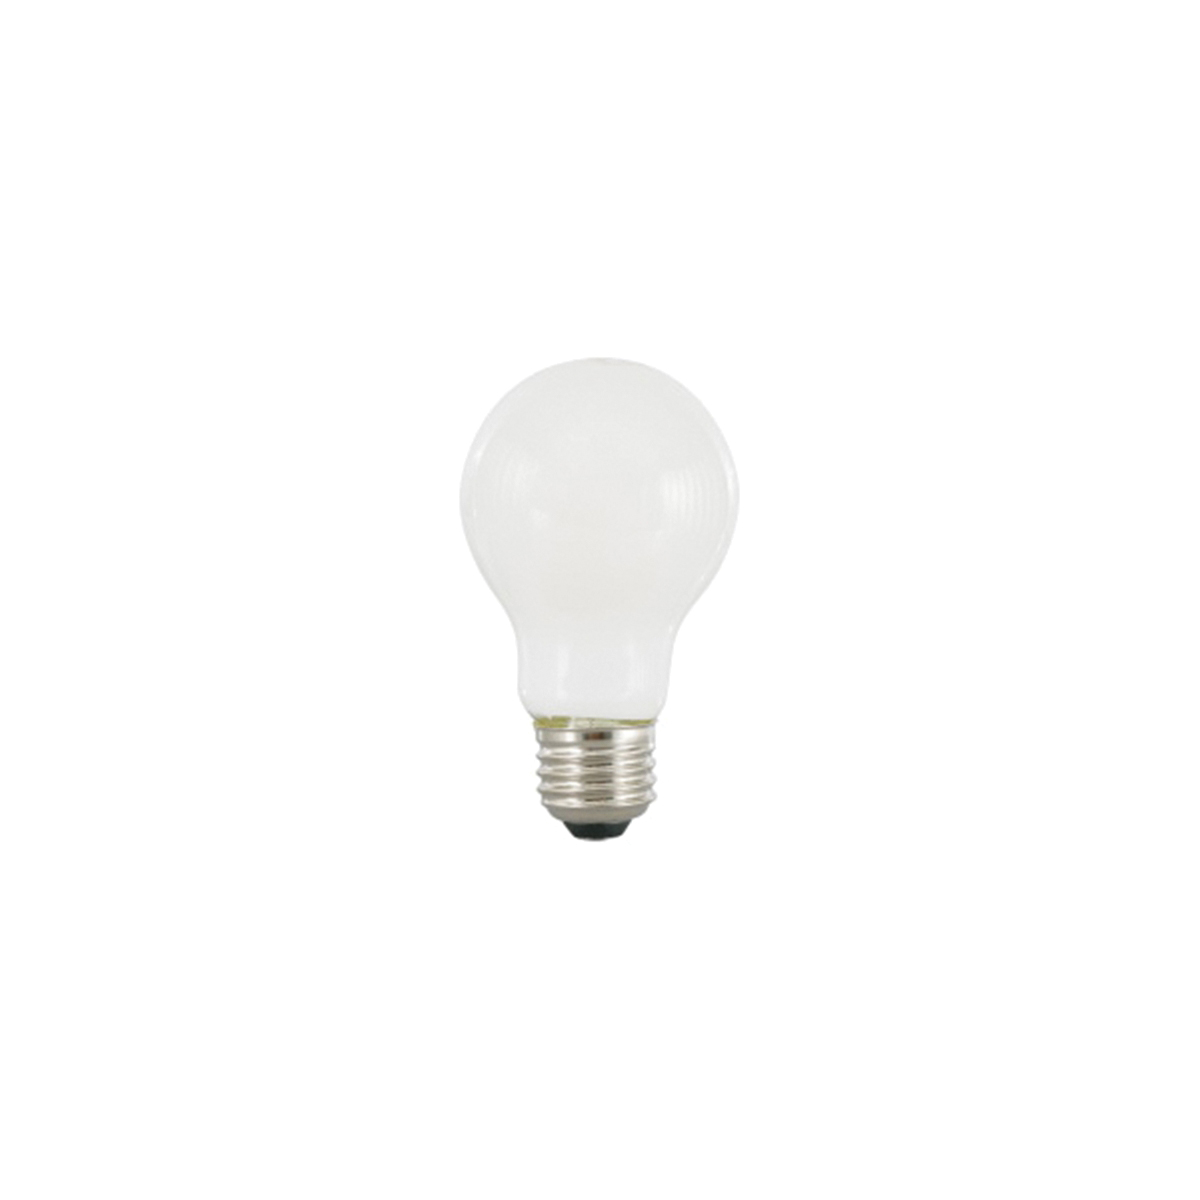 TruWave Series 40751 LED Bulb A19 Lamp, A19 Lamp, E26 Medium Lamp Base, Dimmable, Frosted, 5000 K Color Temp, 2/PK